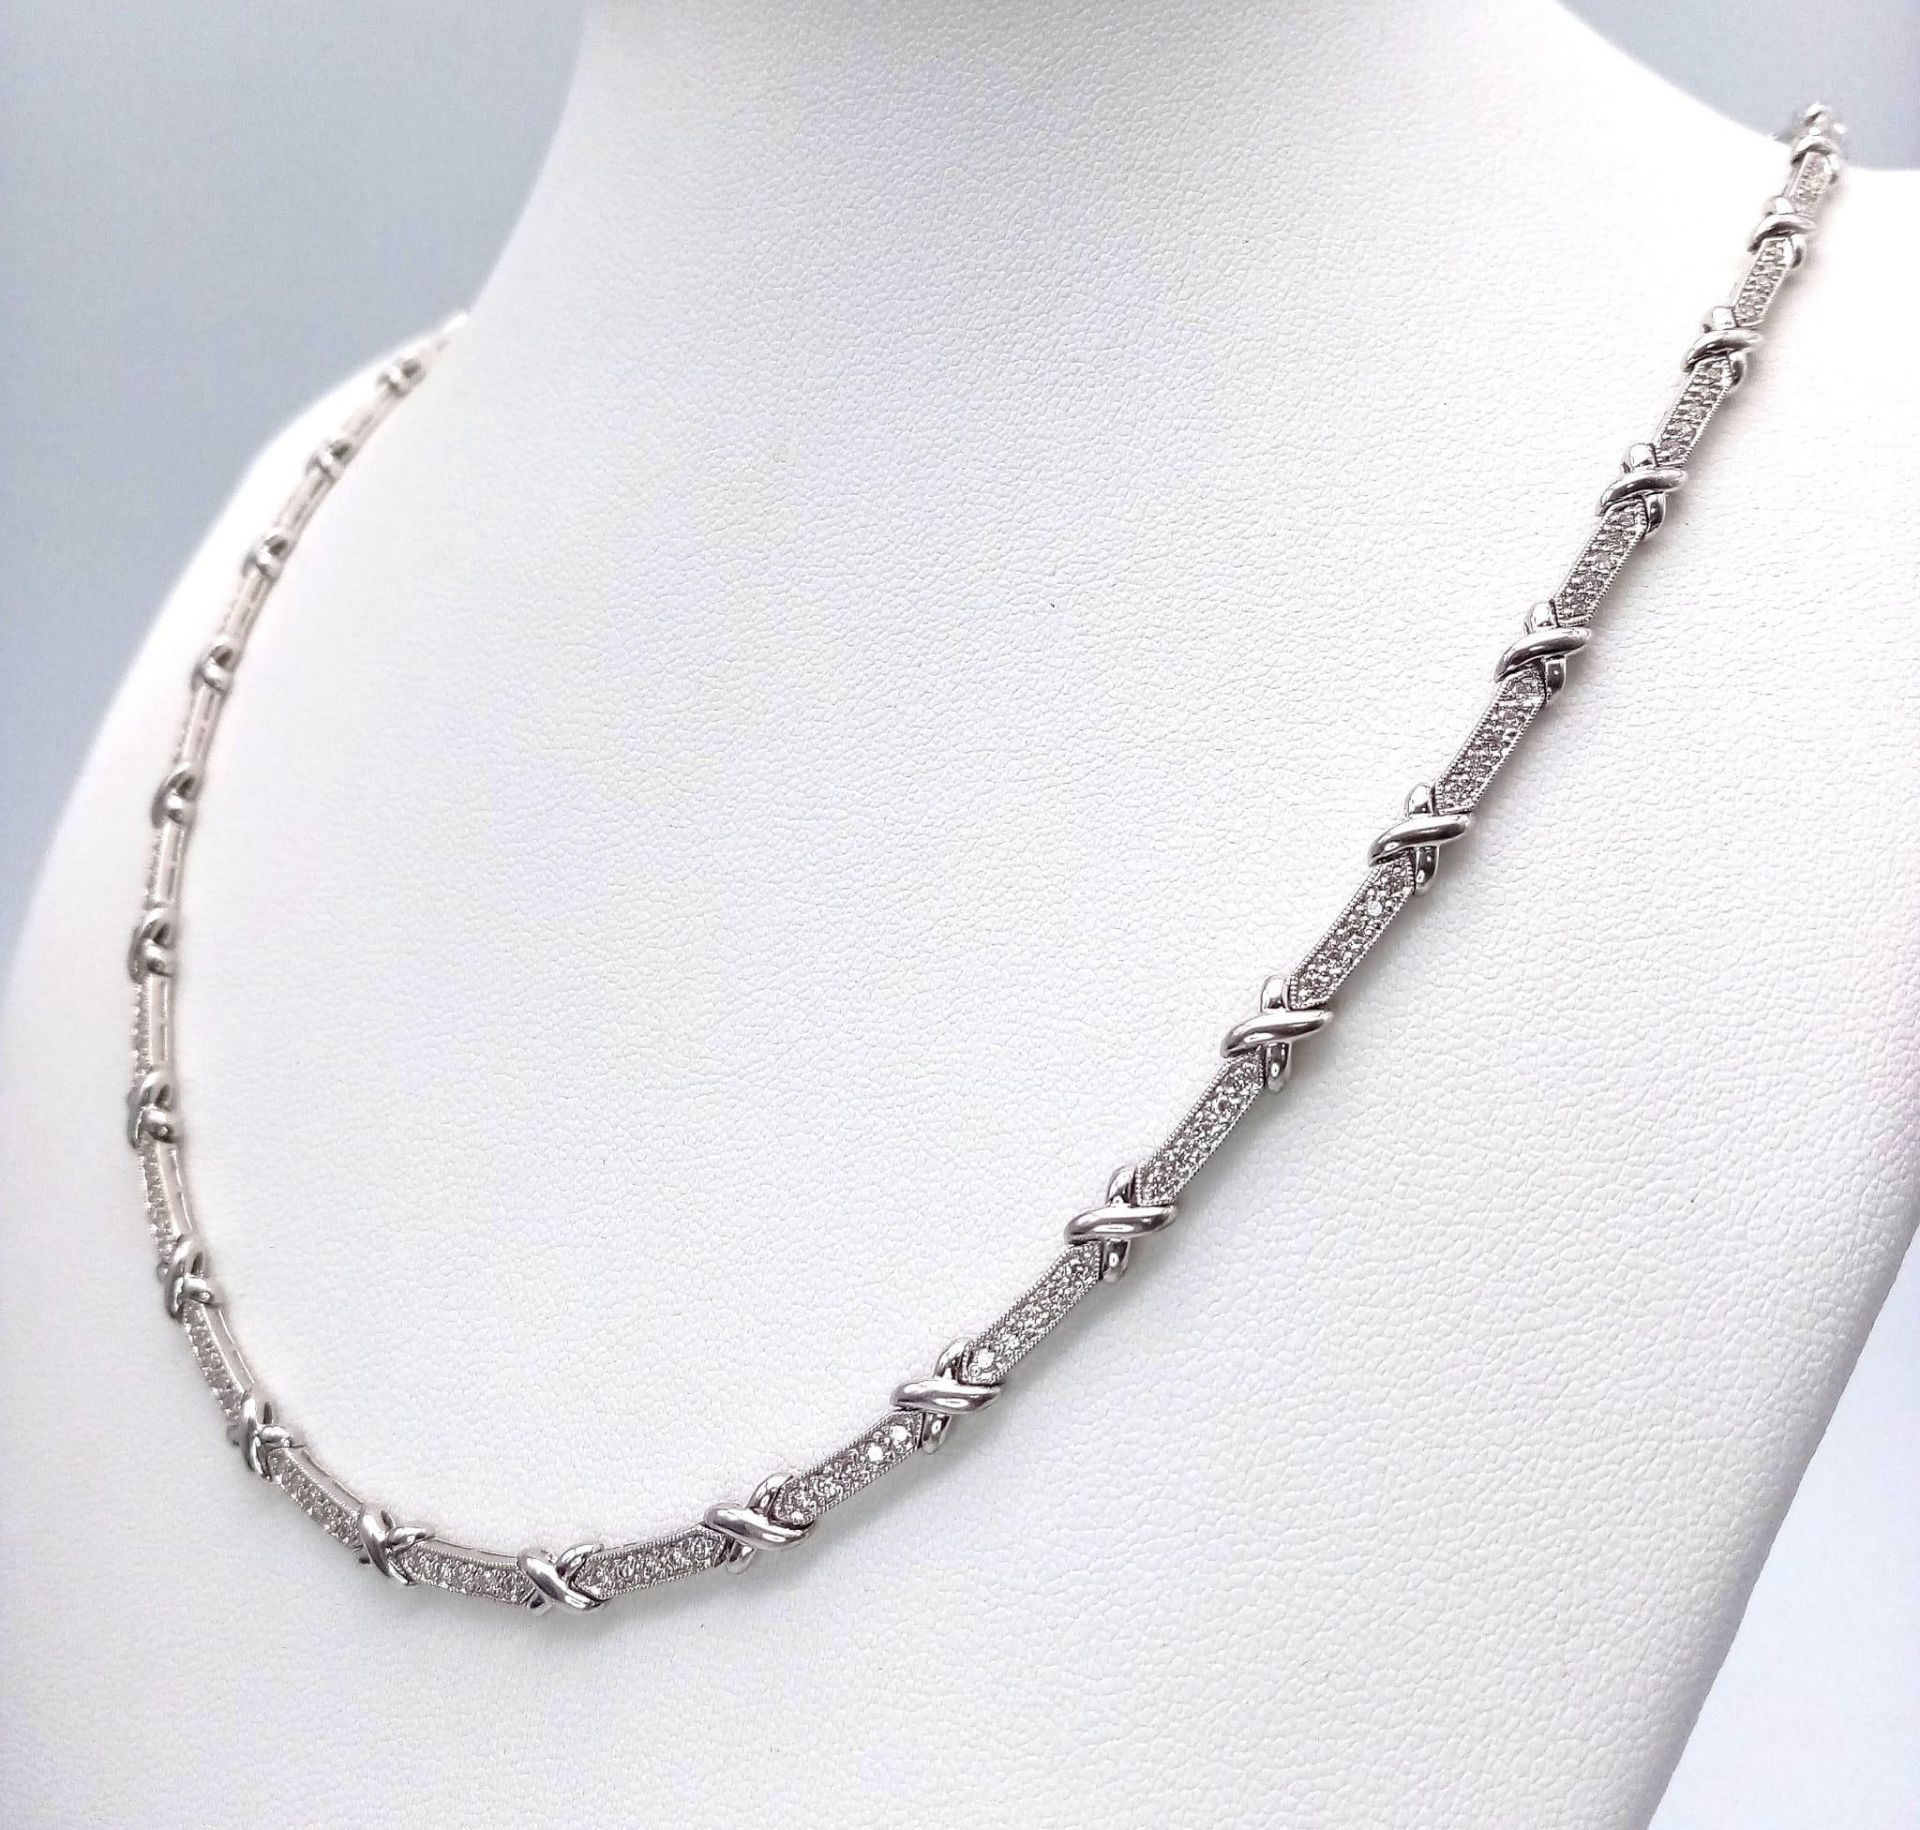 An 18K White Gold and Diamond Bar Link Necklace. 1.24ctw of diamonds. Love-knot separators. 43cm - Image 3 of 6